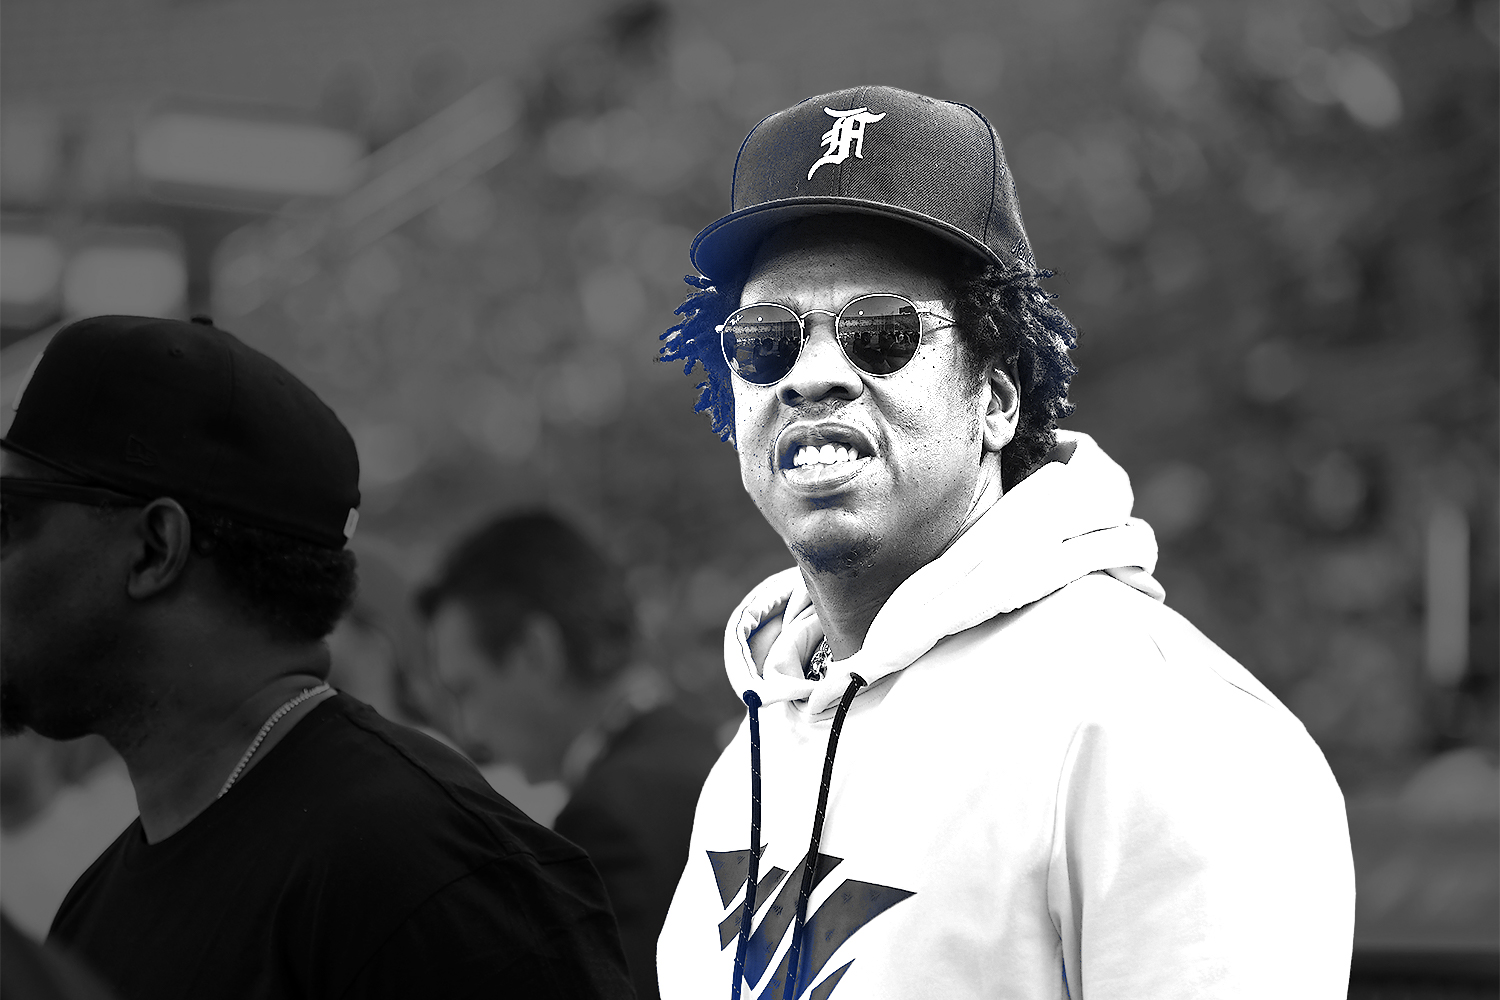 jay_z_with_sunglasses_on